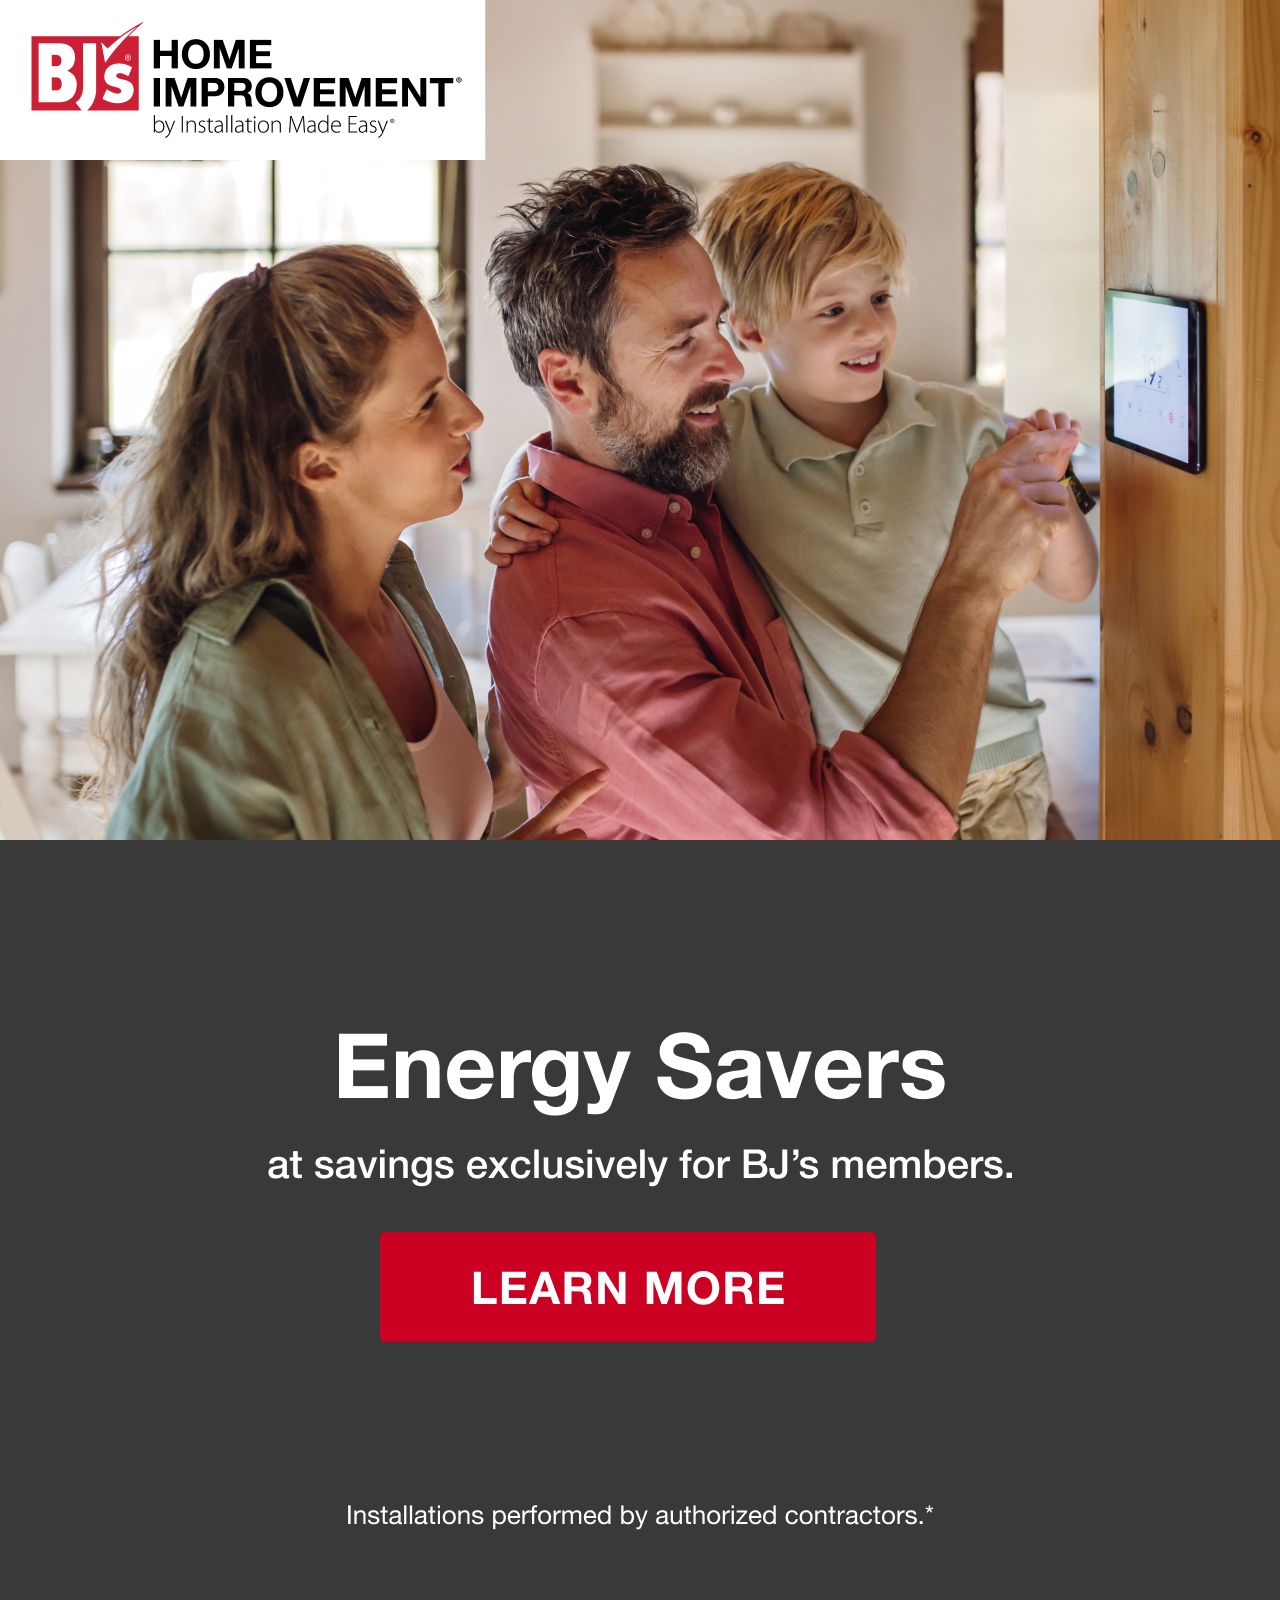 Home Improvement: Energy Saver Projects. Click to learn more